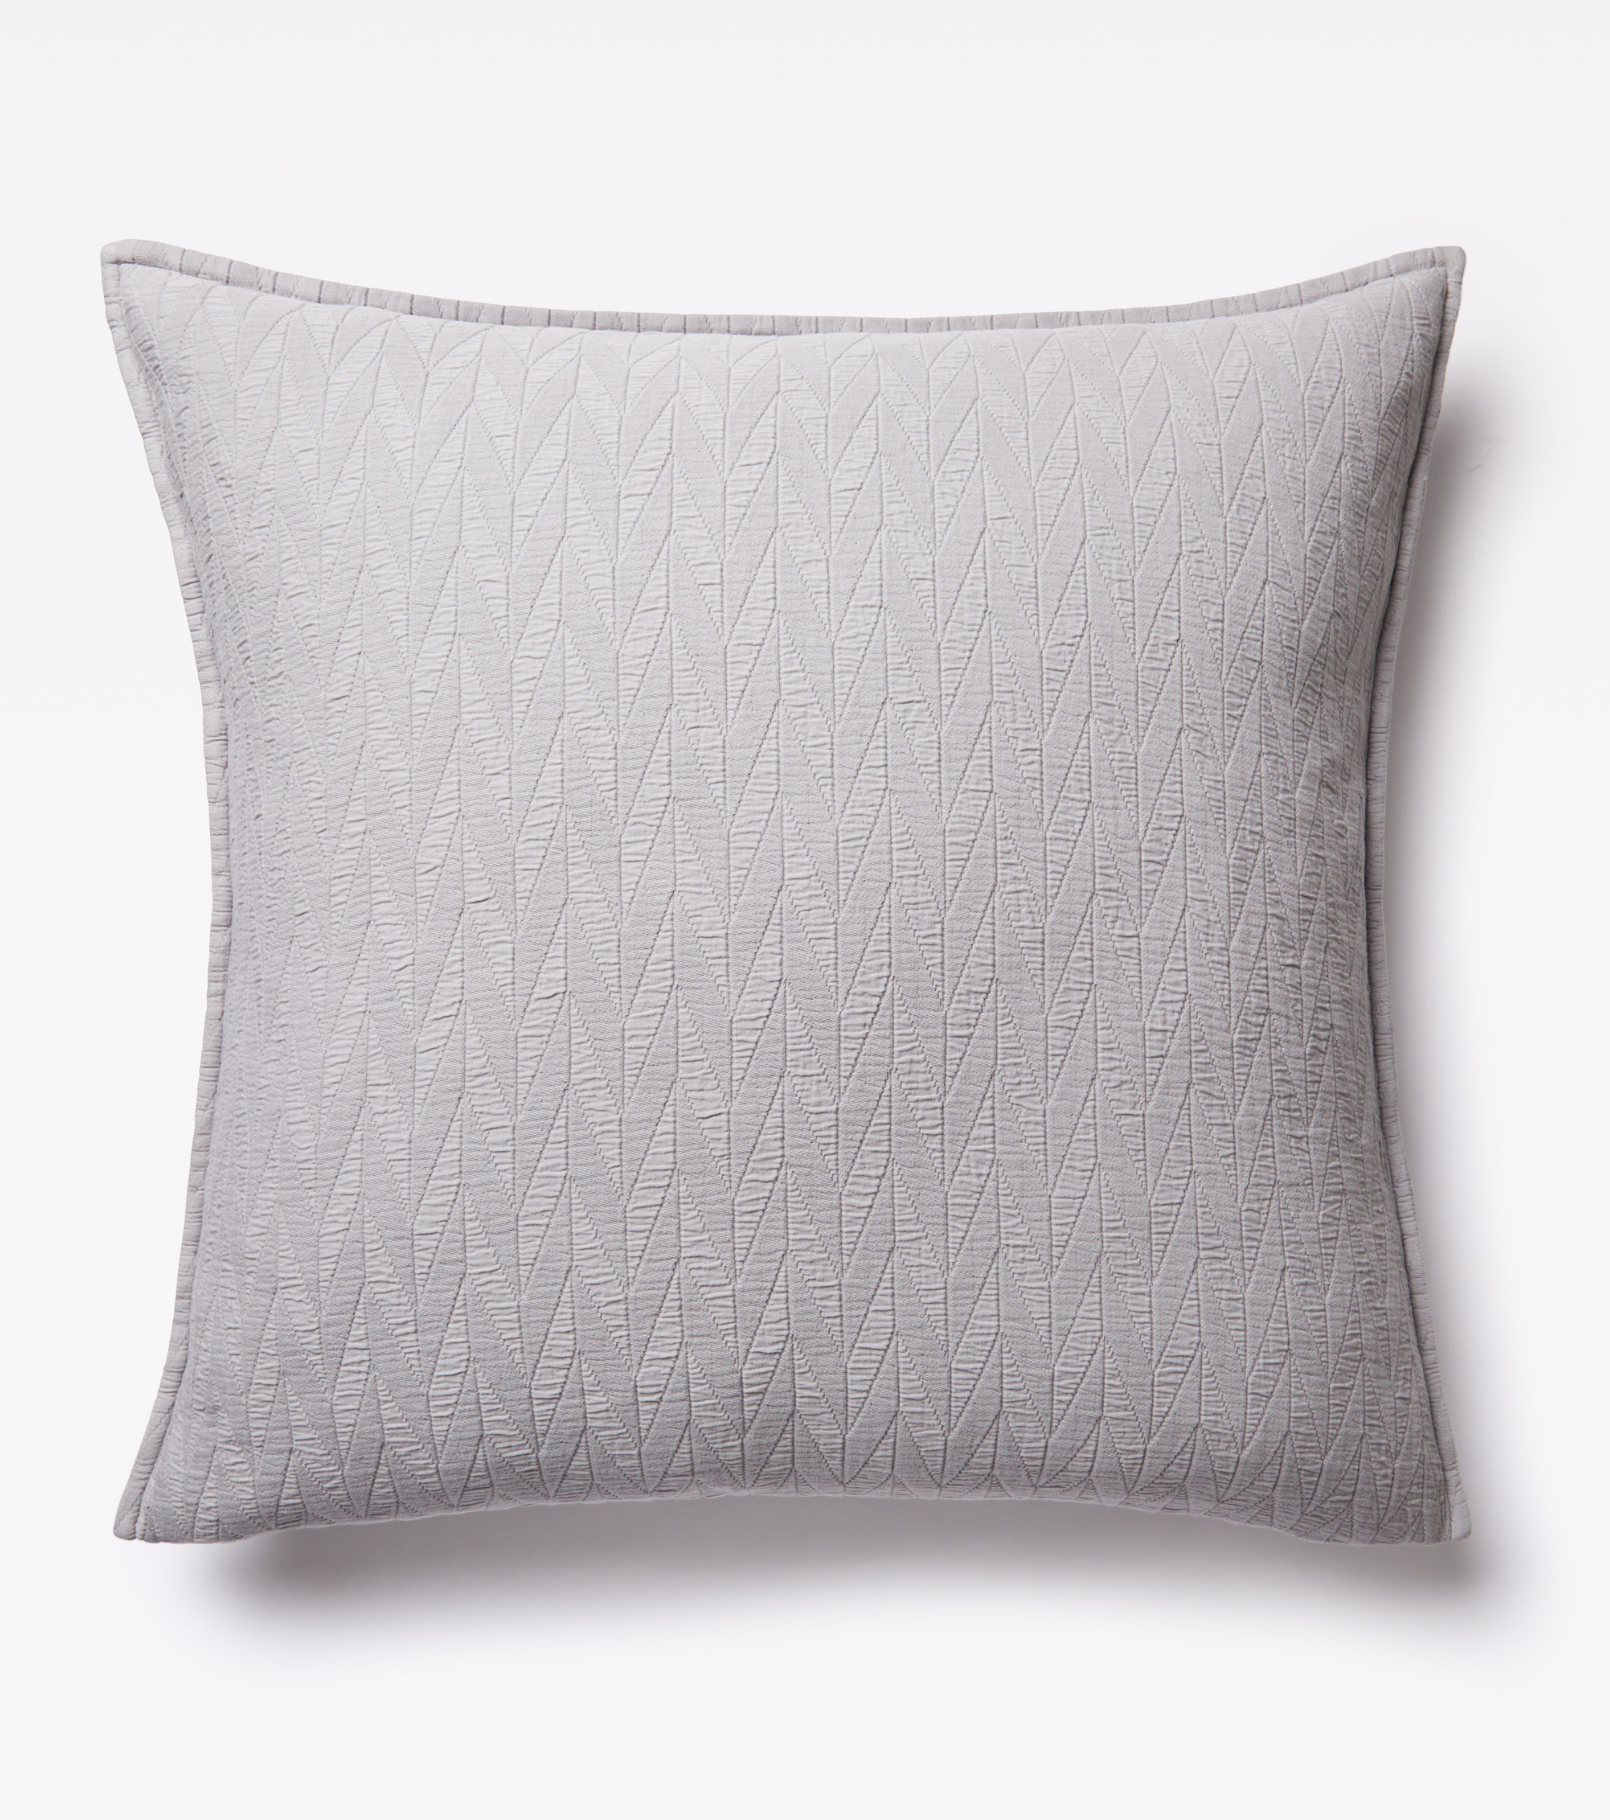 Averylily pure cotton matelassé Euro Sham. Each sham features a herringbone design that is unique to Averylily. Shown here in Stone.